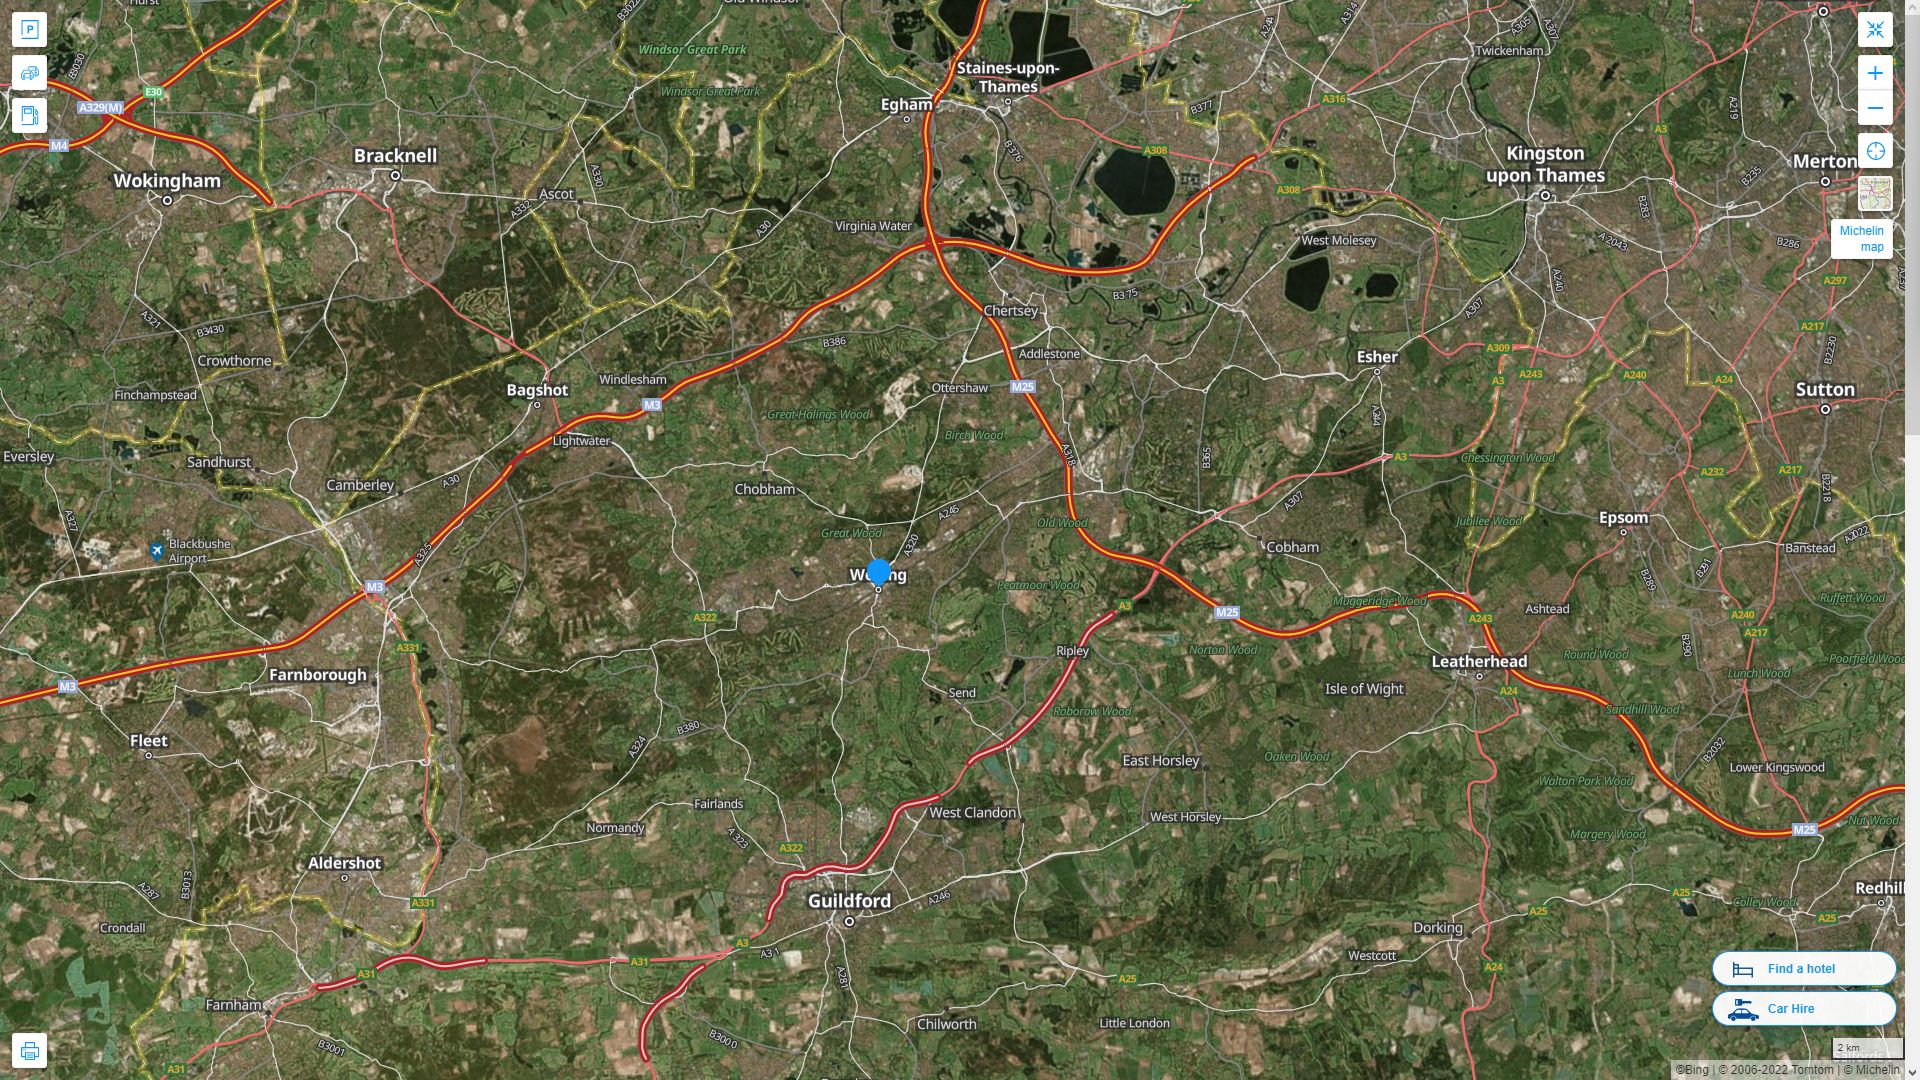 Woking Highway and Road Map with Satellite View